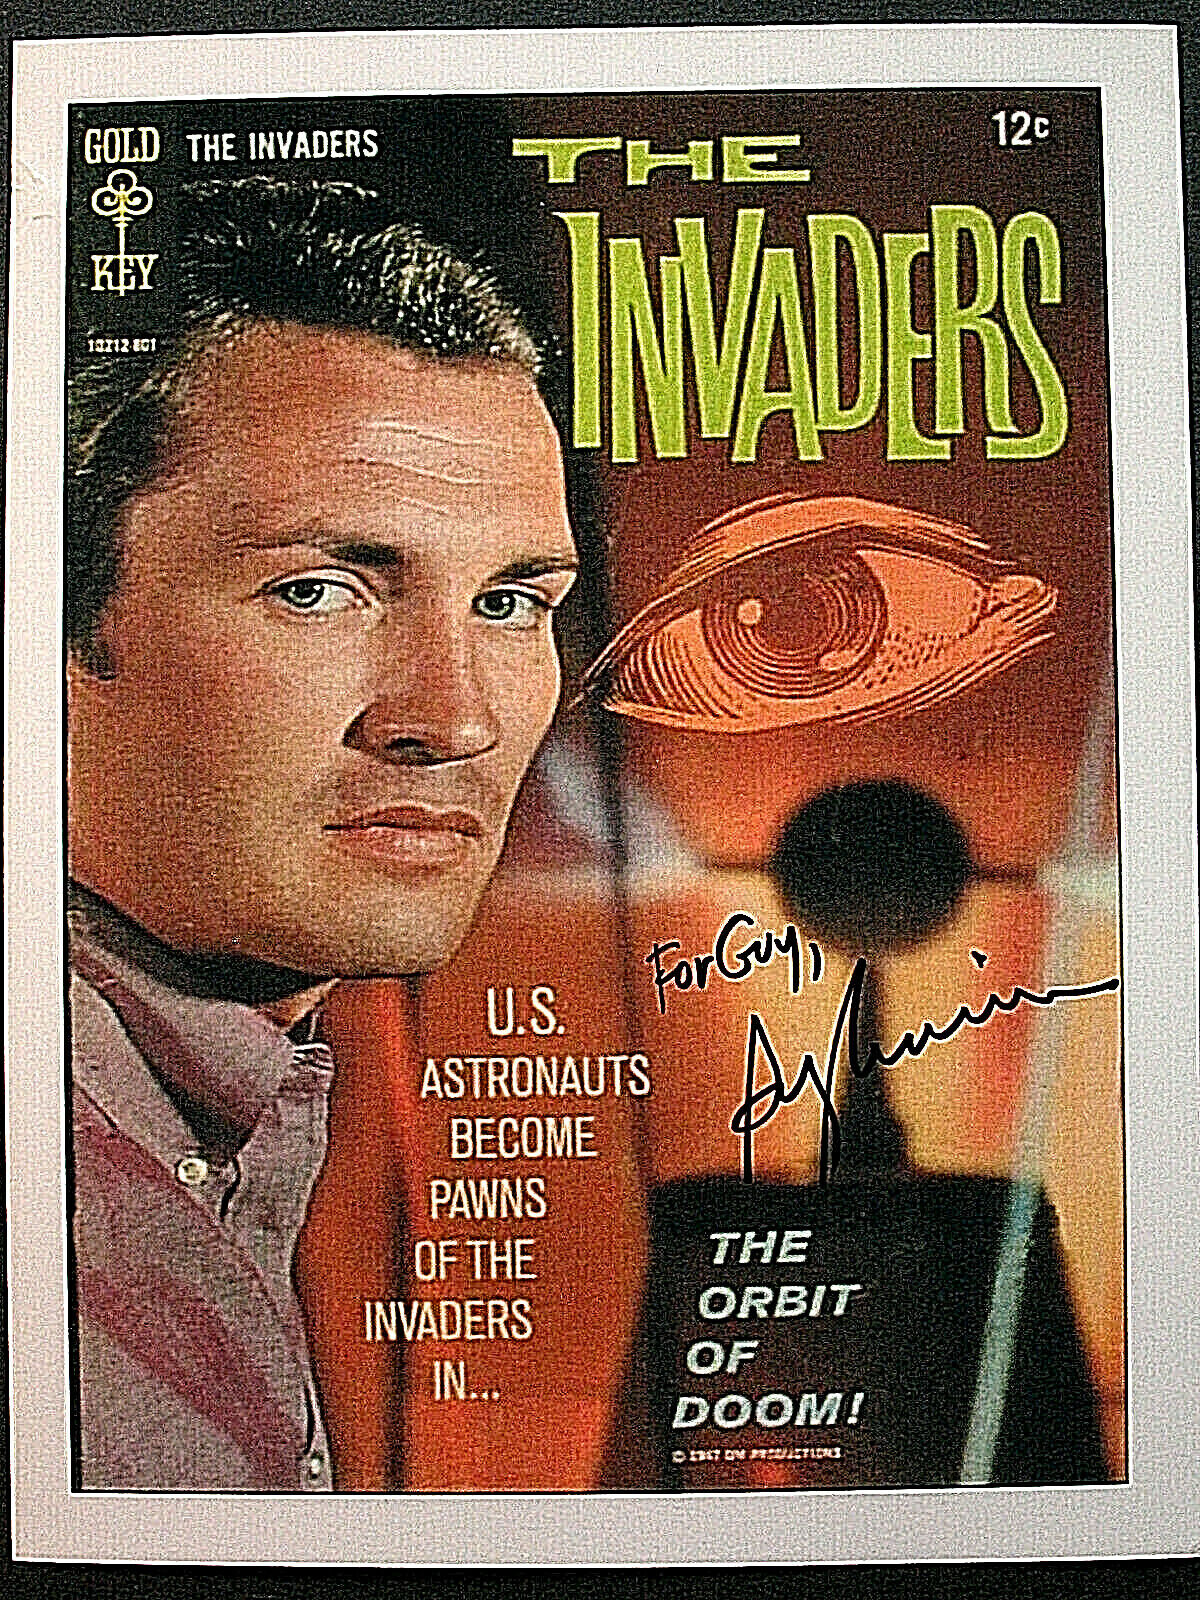 ROY THINNES (THE INVADERS) HAND SIGN AUTOGRAPH Photo Poster painting (CLASSIC SCI-FI TV SHOW)